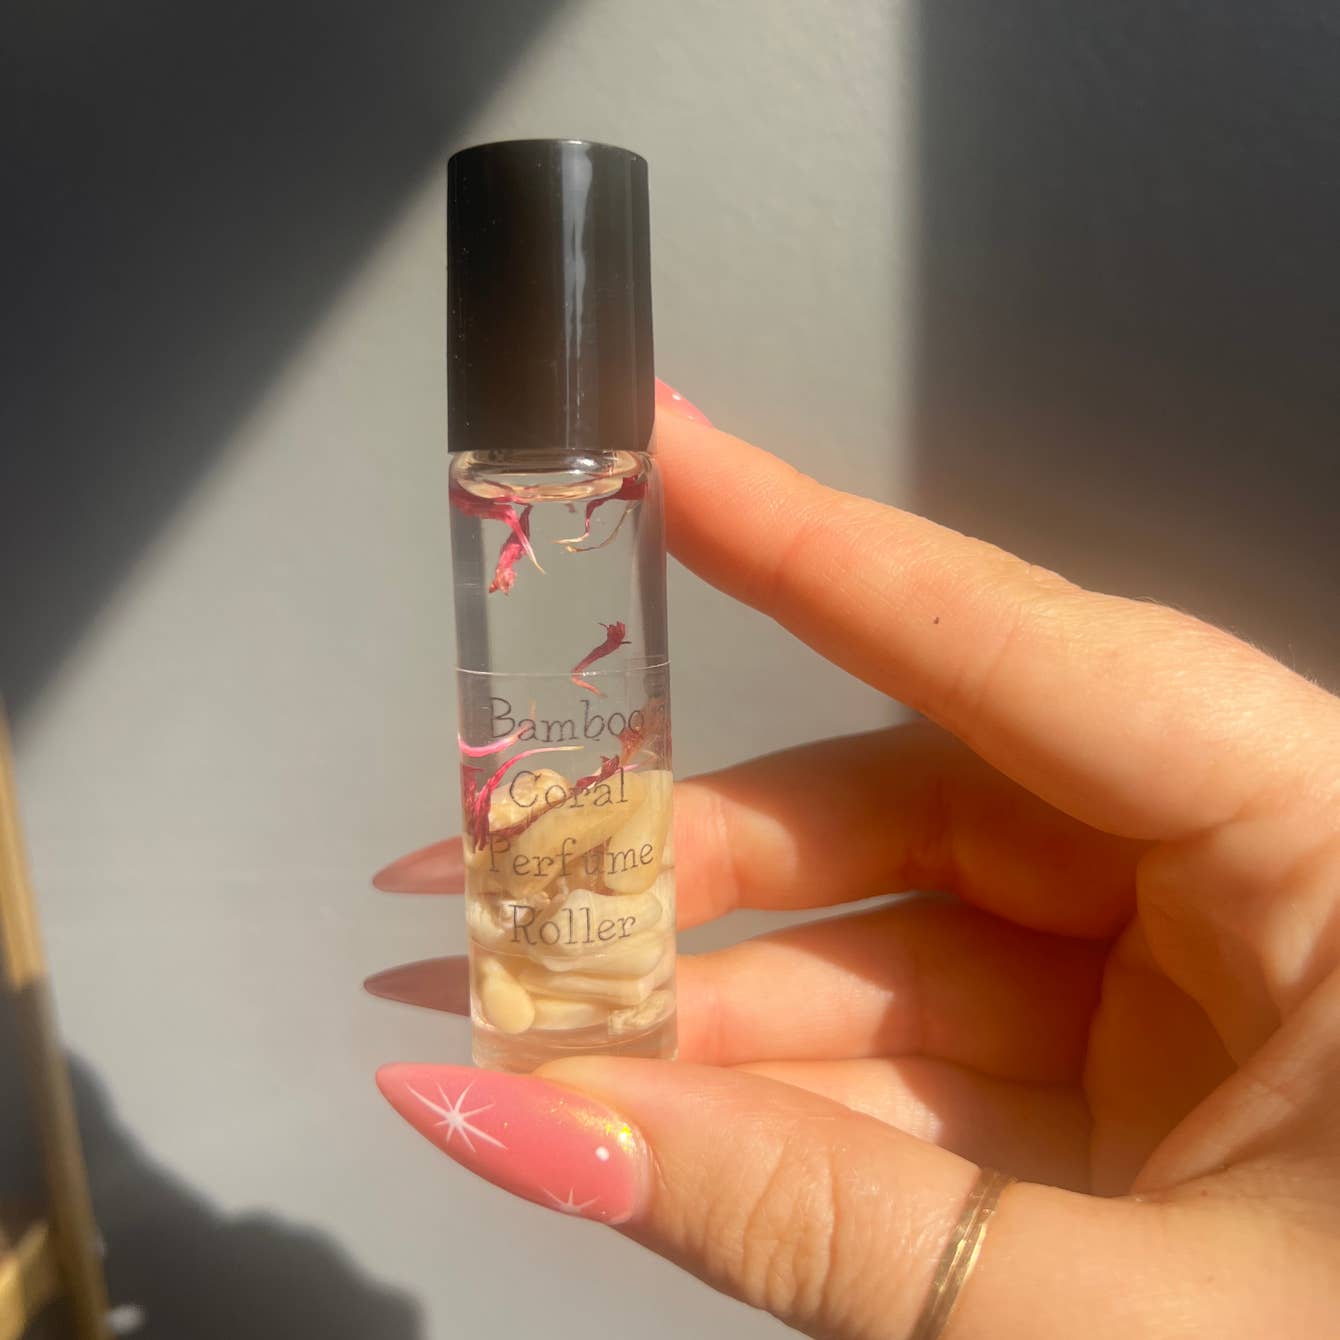 Bamboo Coral Perfume Roller